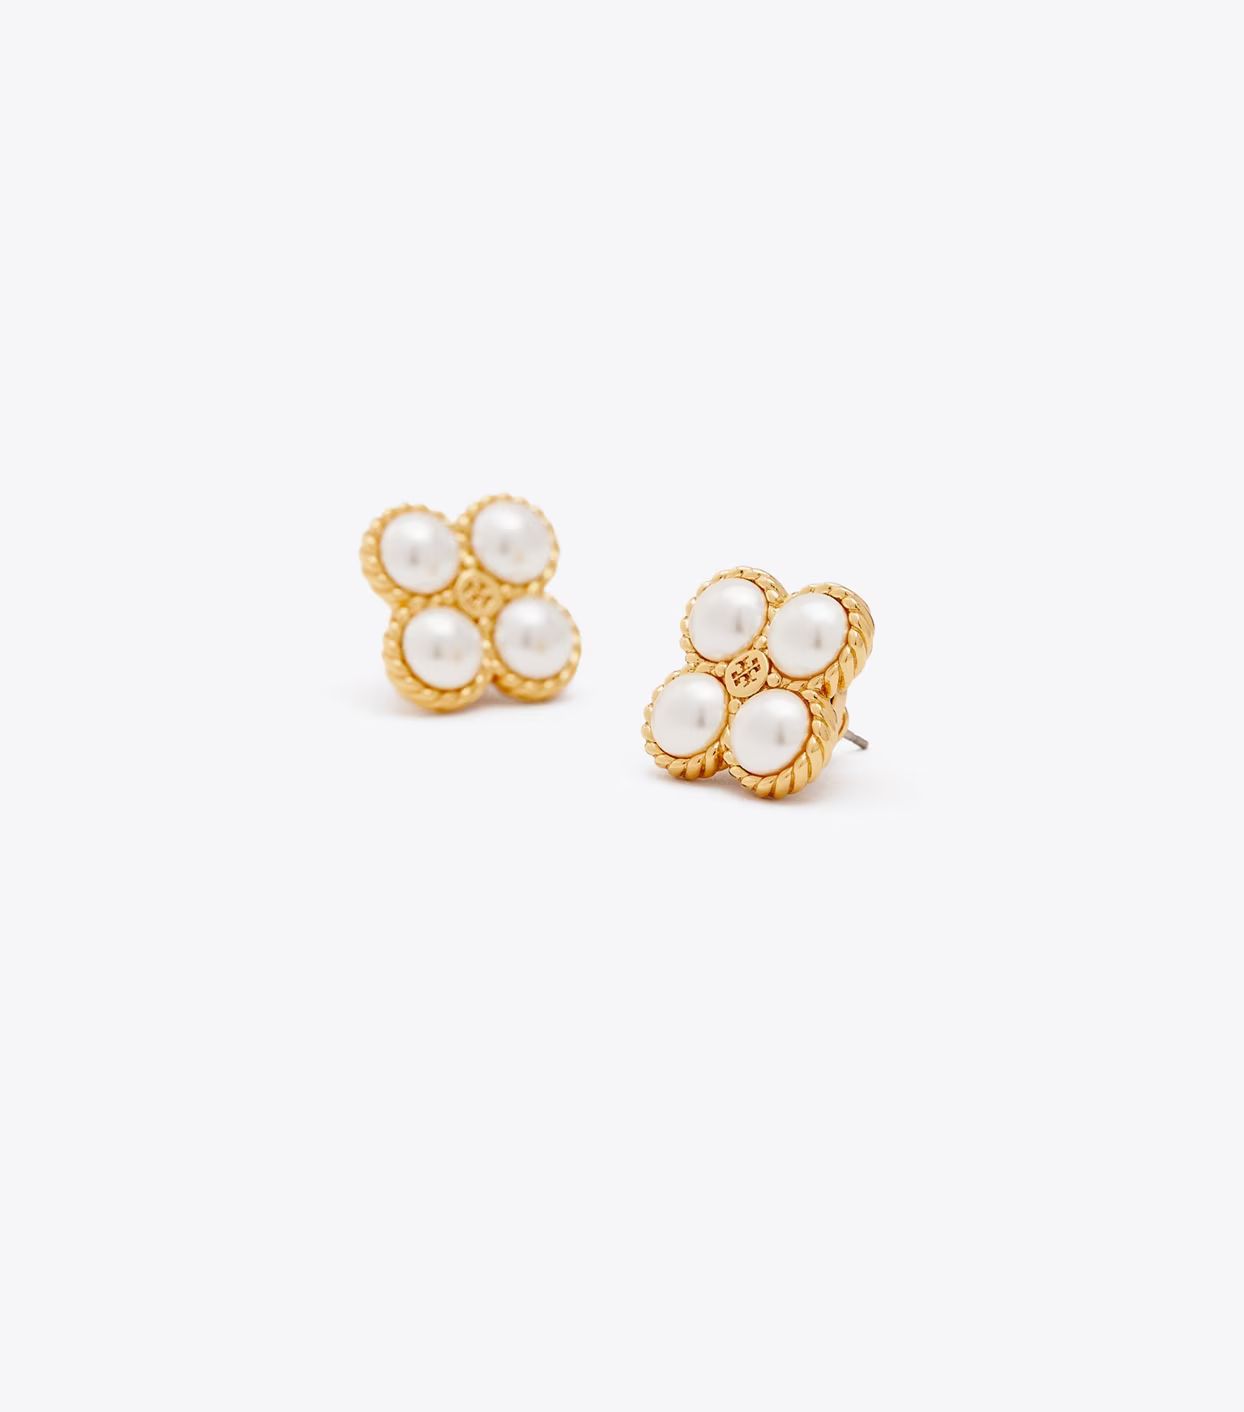 Tory Burch Rope Clover Pearl Stud Earring: Women's Accessories | Tory Burch (US)